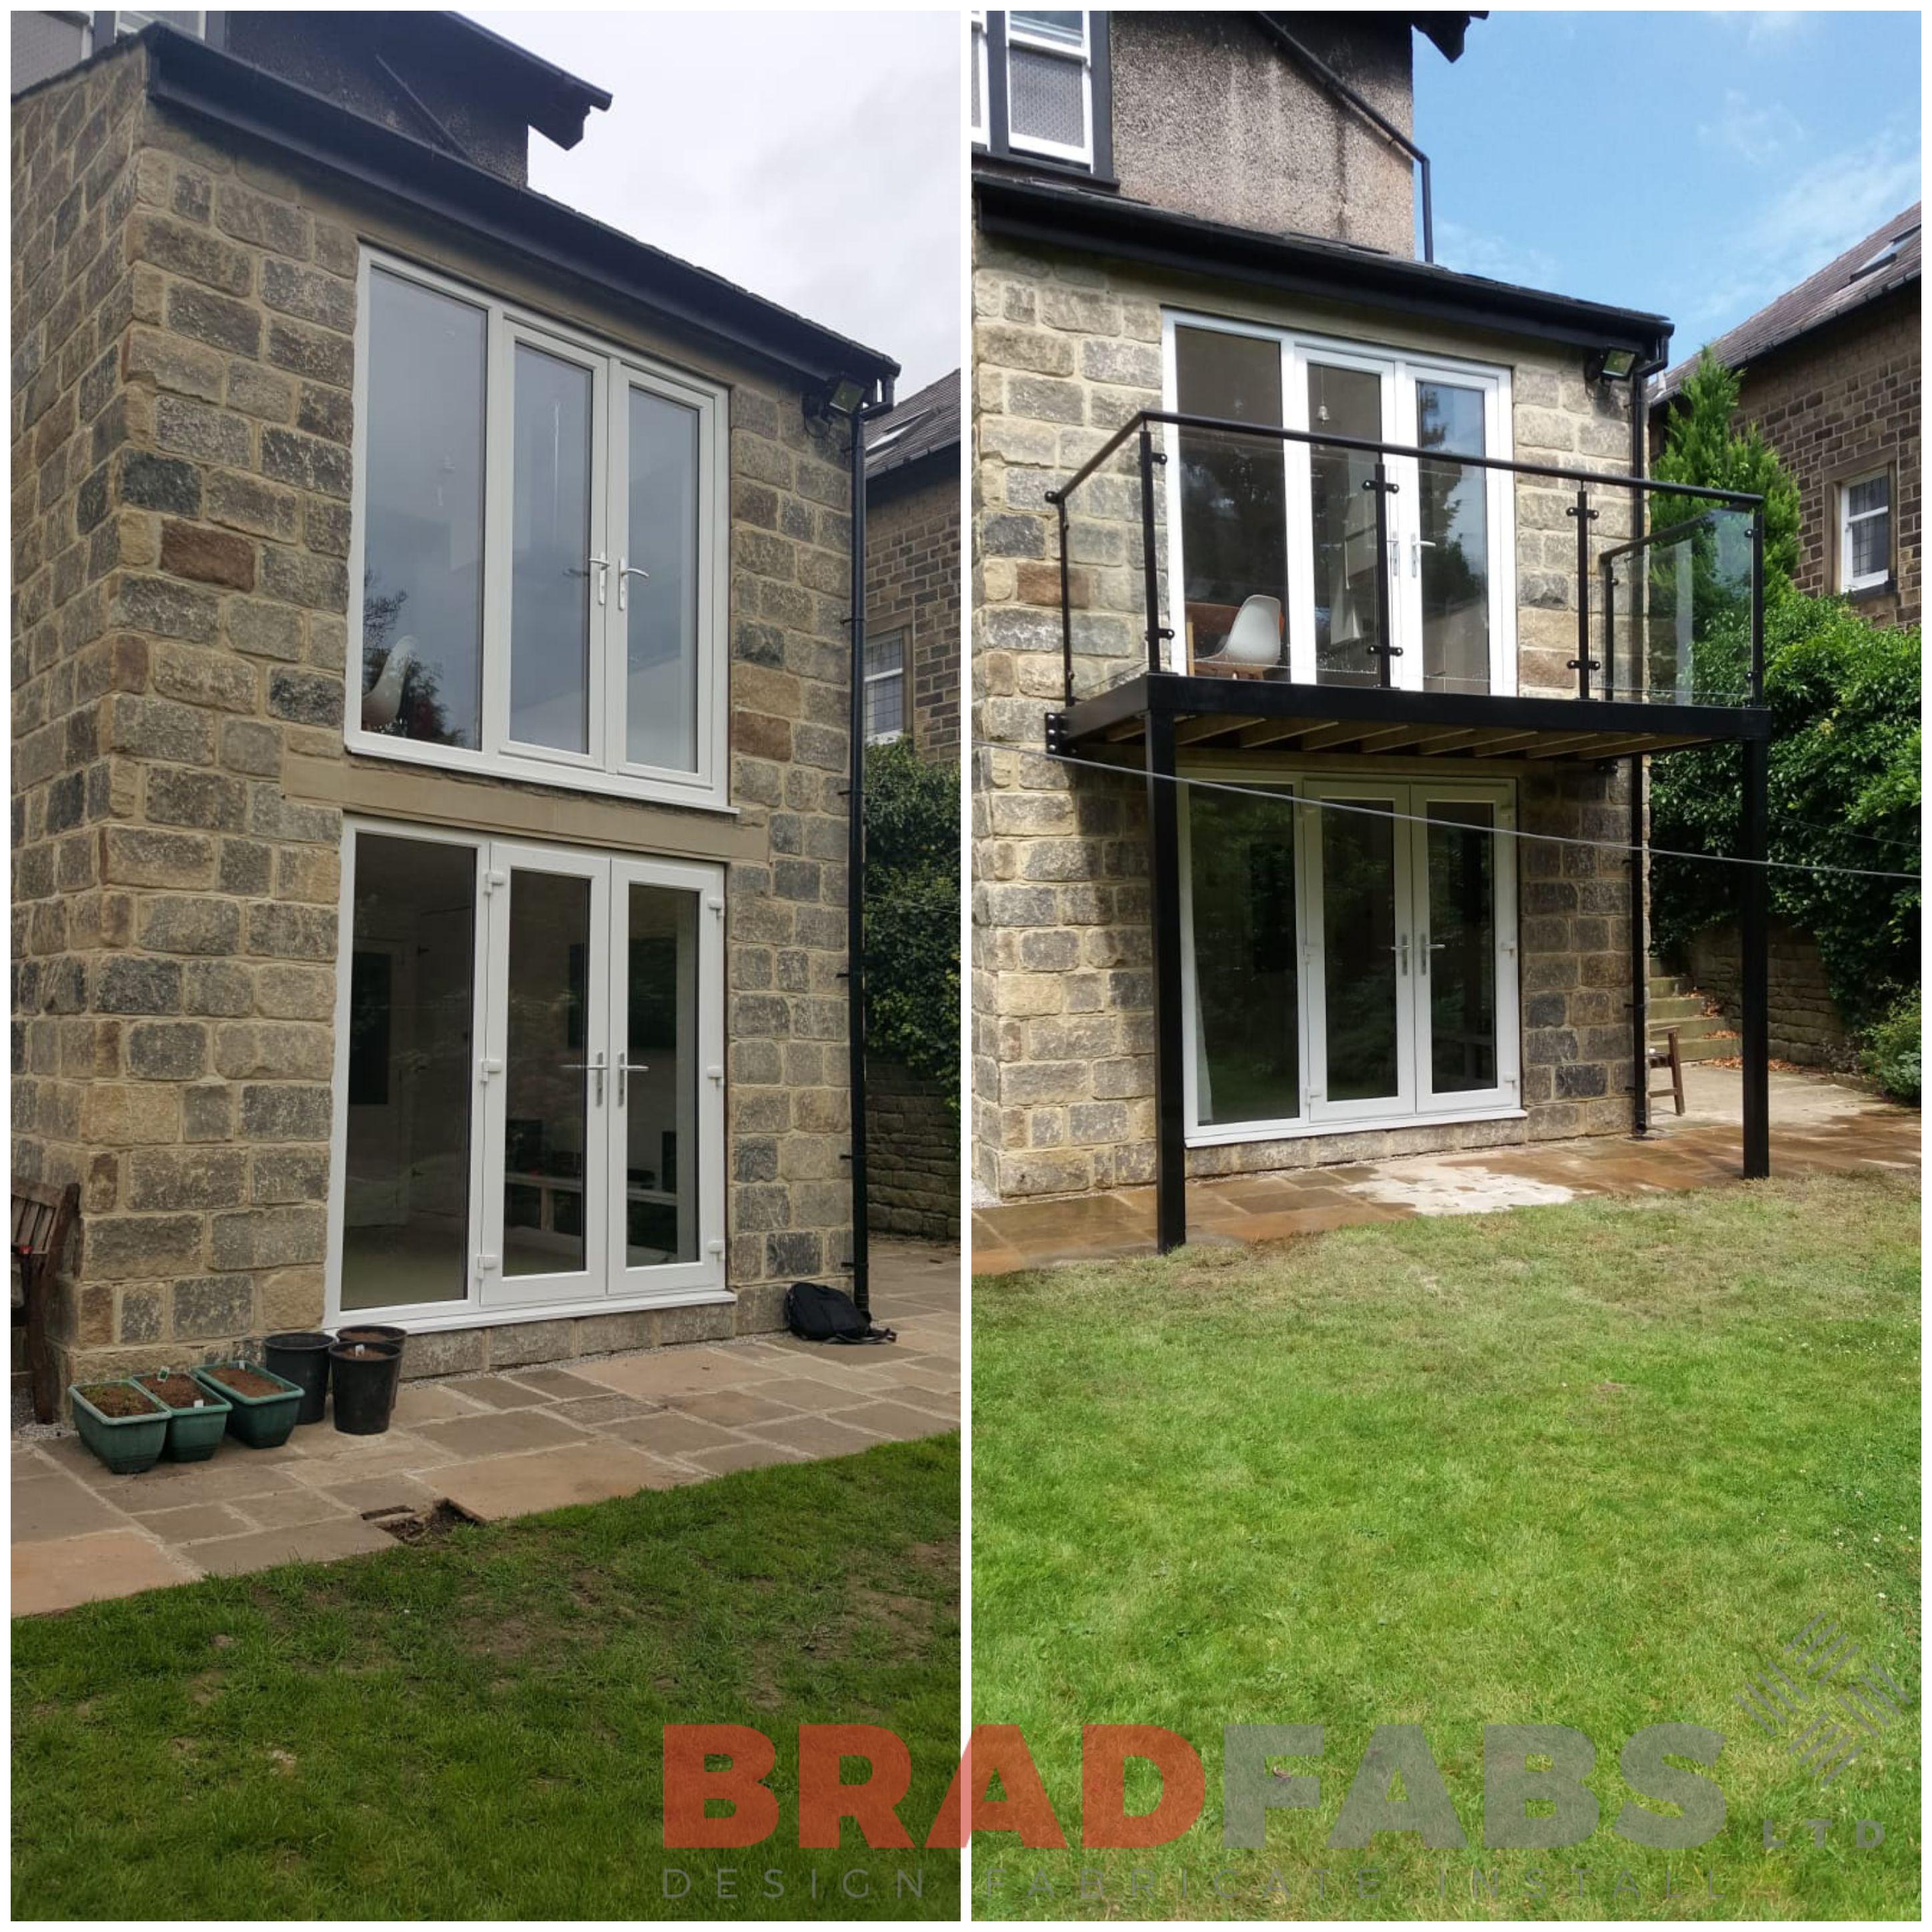 Adding value onto a property with this bespoke metal and glass balcony designed, fabricated and installed by Bradfabs, Bradford, West Yorkshire based company